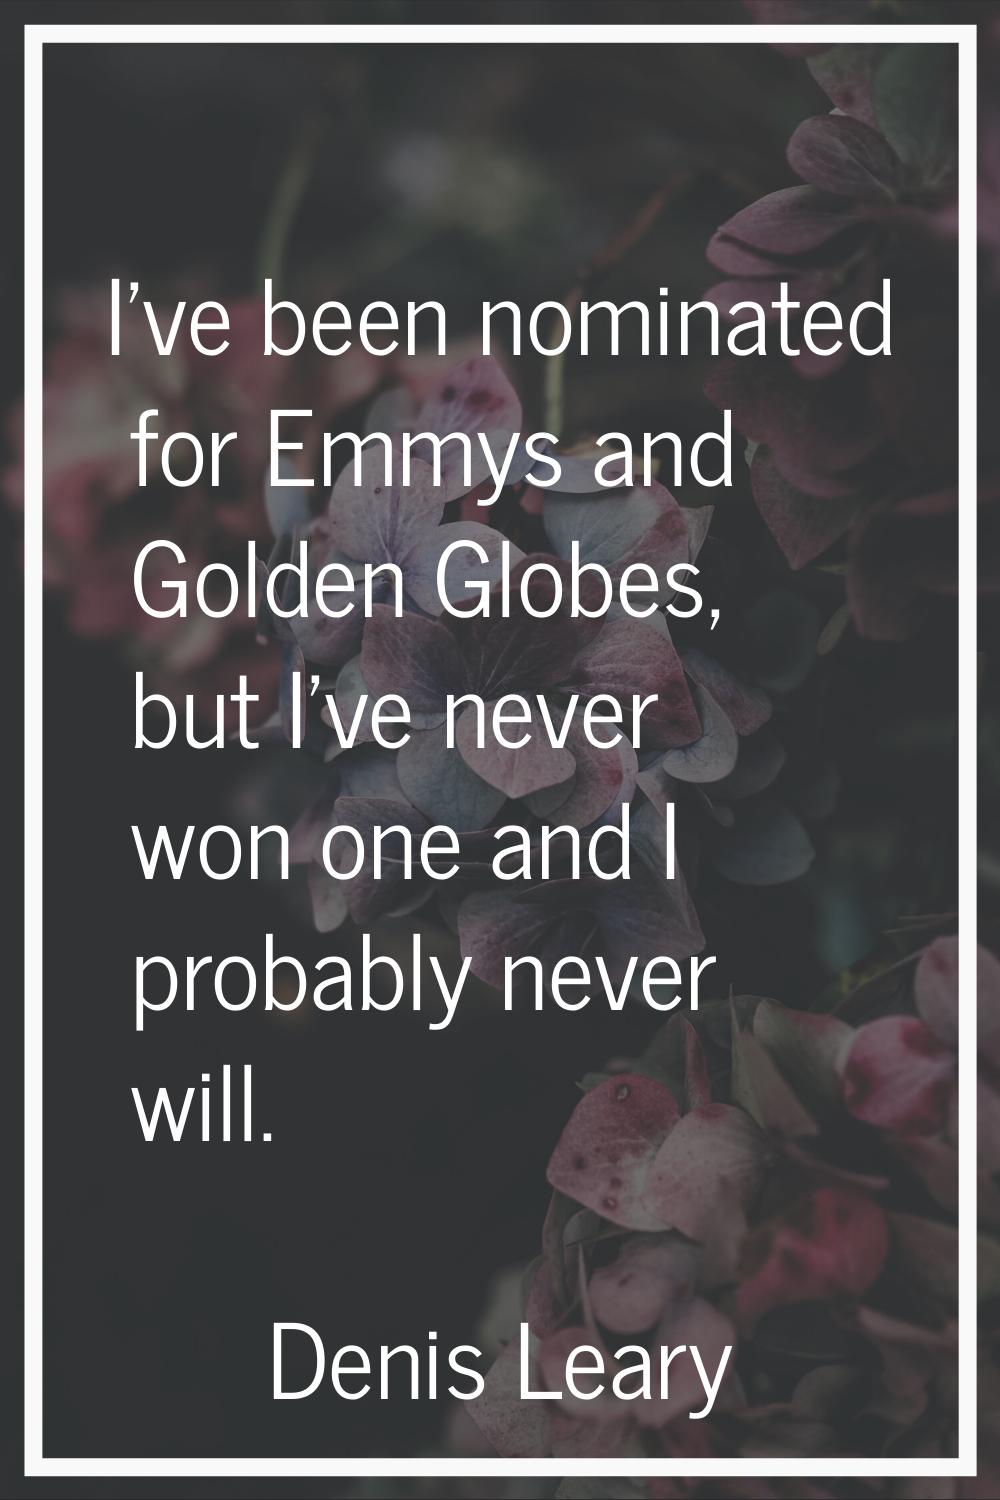 I've been nominated for Emmys and Golden Globes, but I've never won one and I probably never will.